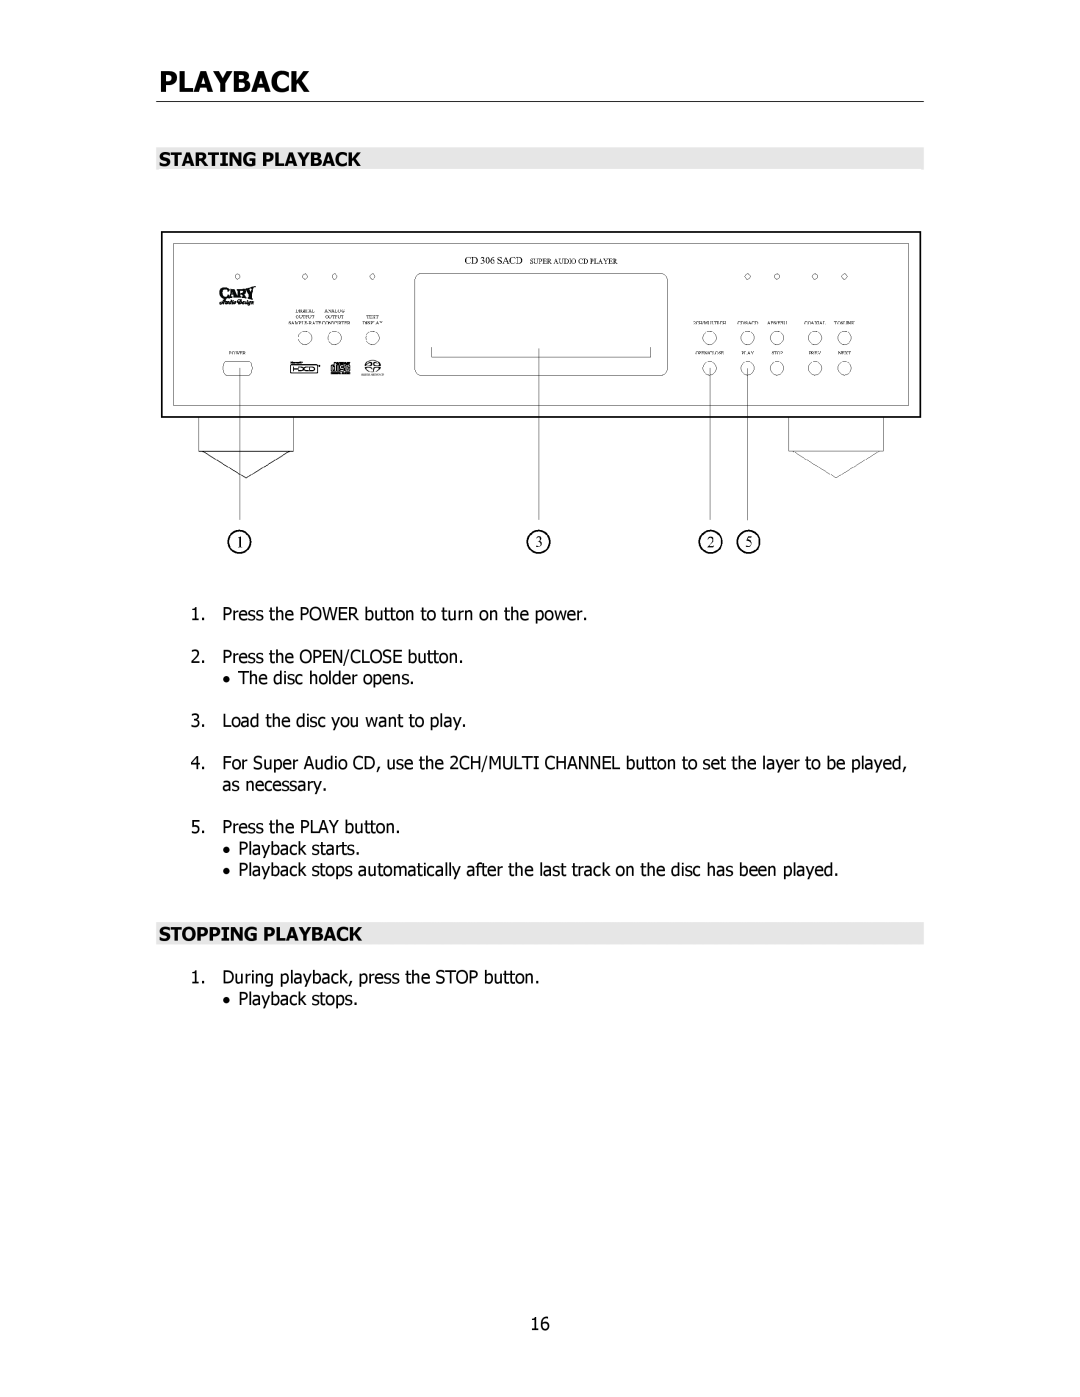 Cary Audio Design CD306SACD owner manual Starting Playback, Stopping Playback 